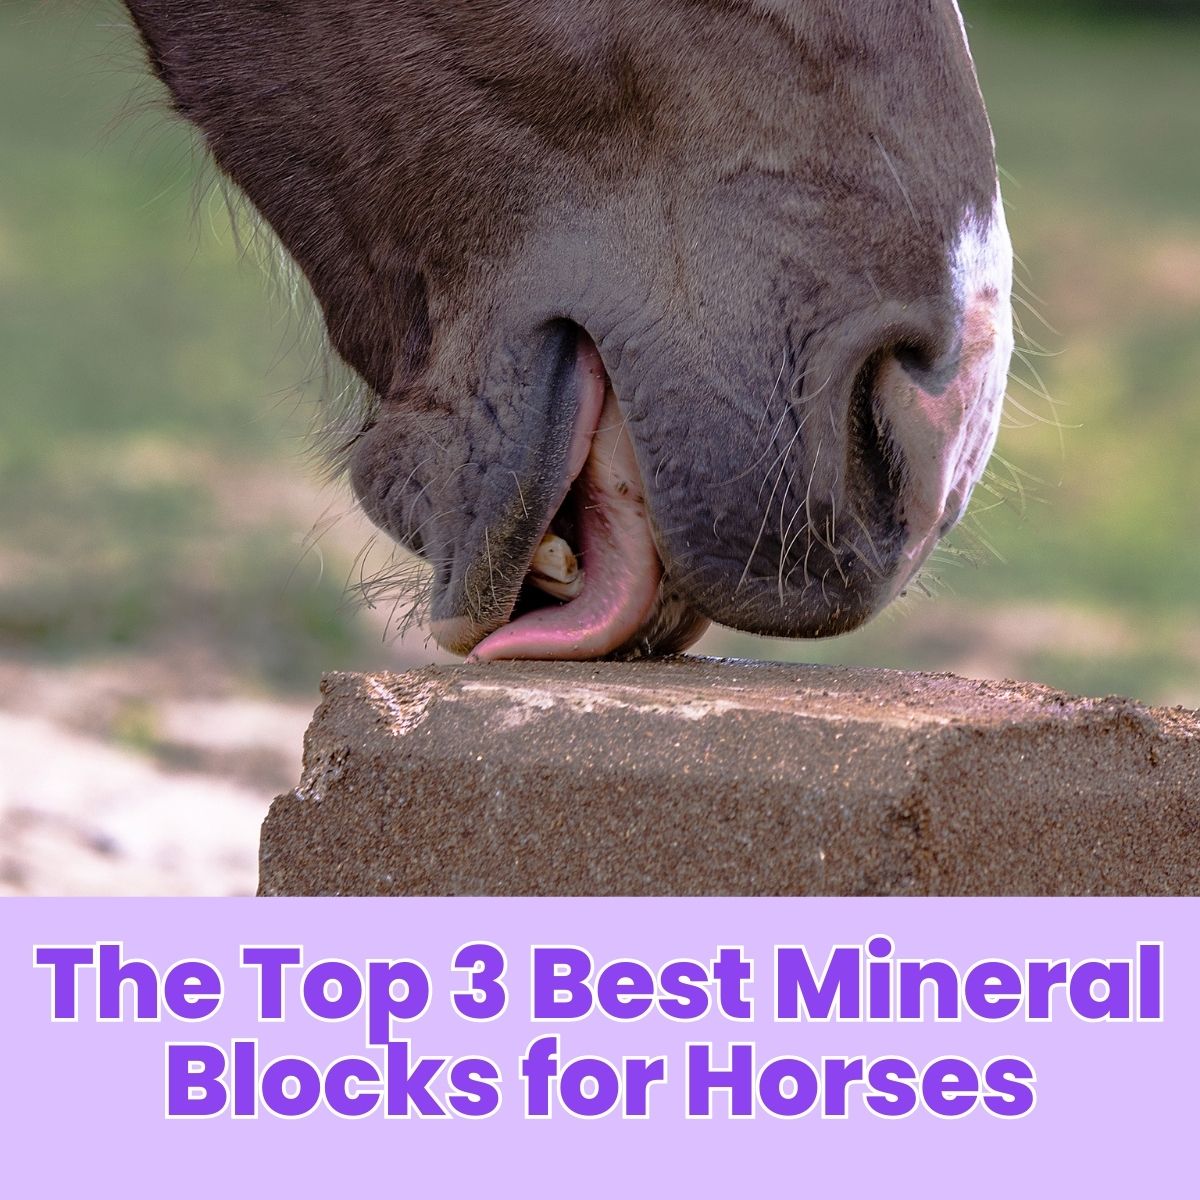 You are currently viewing The Top 3 Best Mineral Blocks for Horses